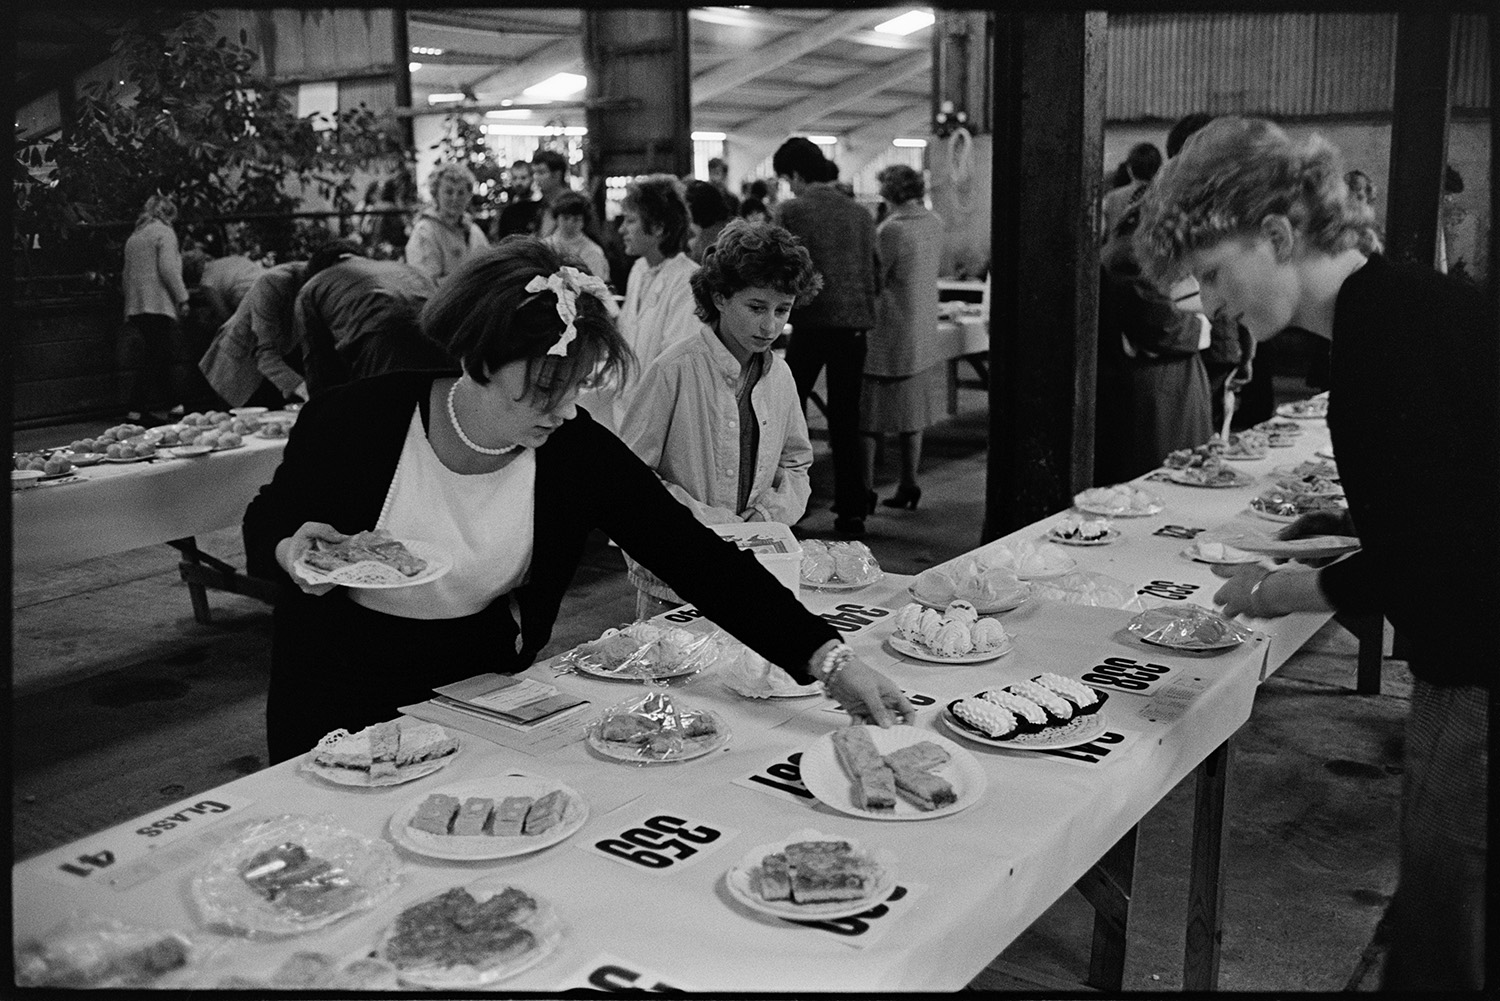 Produce at show, cakes and competitions.
[Women laying cakes out for a competition at Hatherleigh Show. People looking at other produce can be seen in the background.]